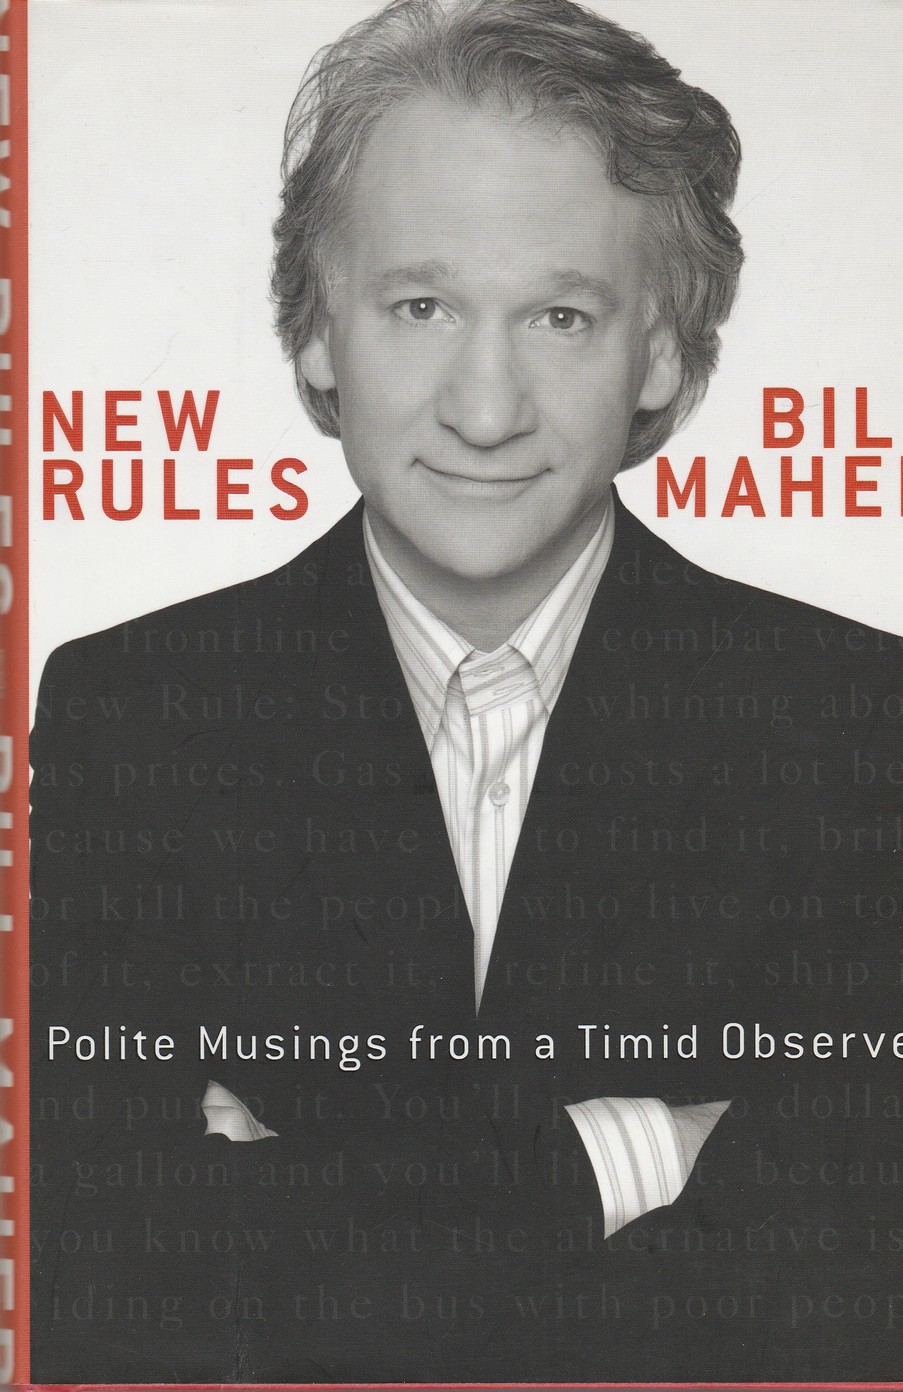 New Rules. Polite Musings from a Timid Observer